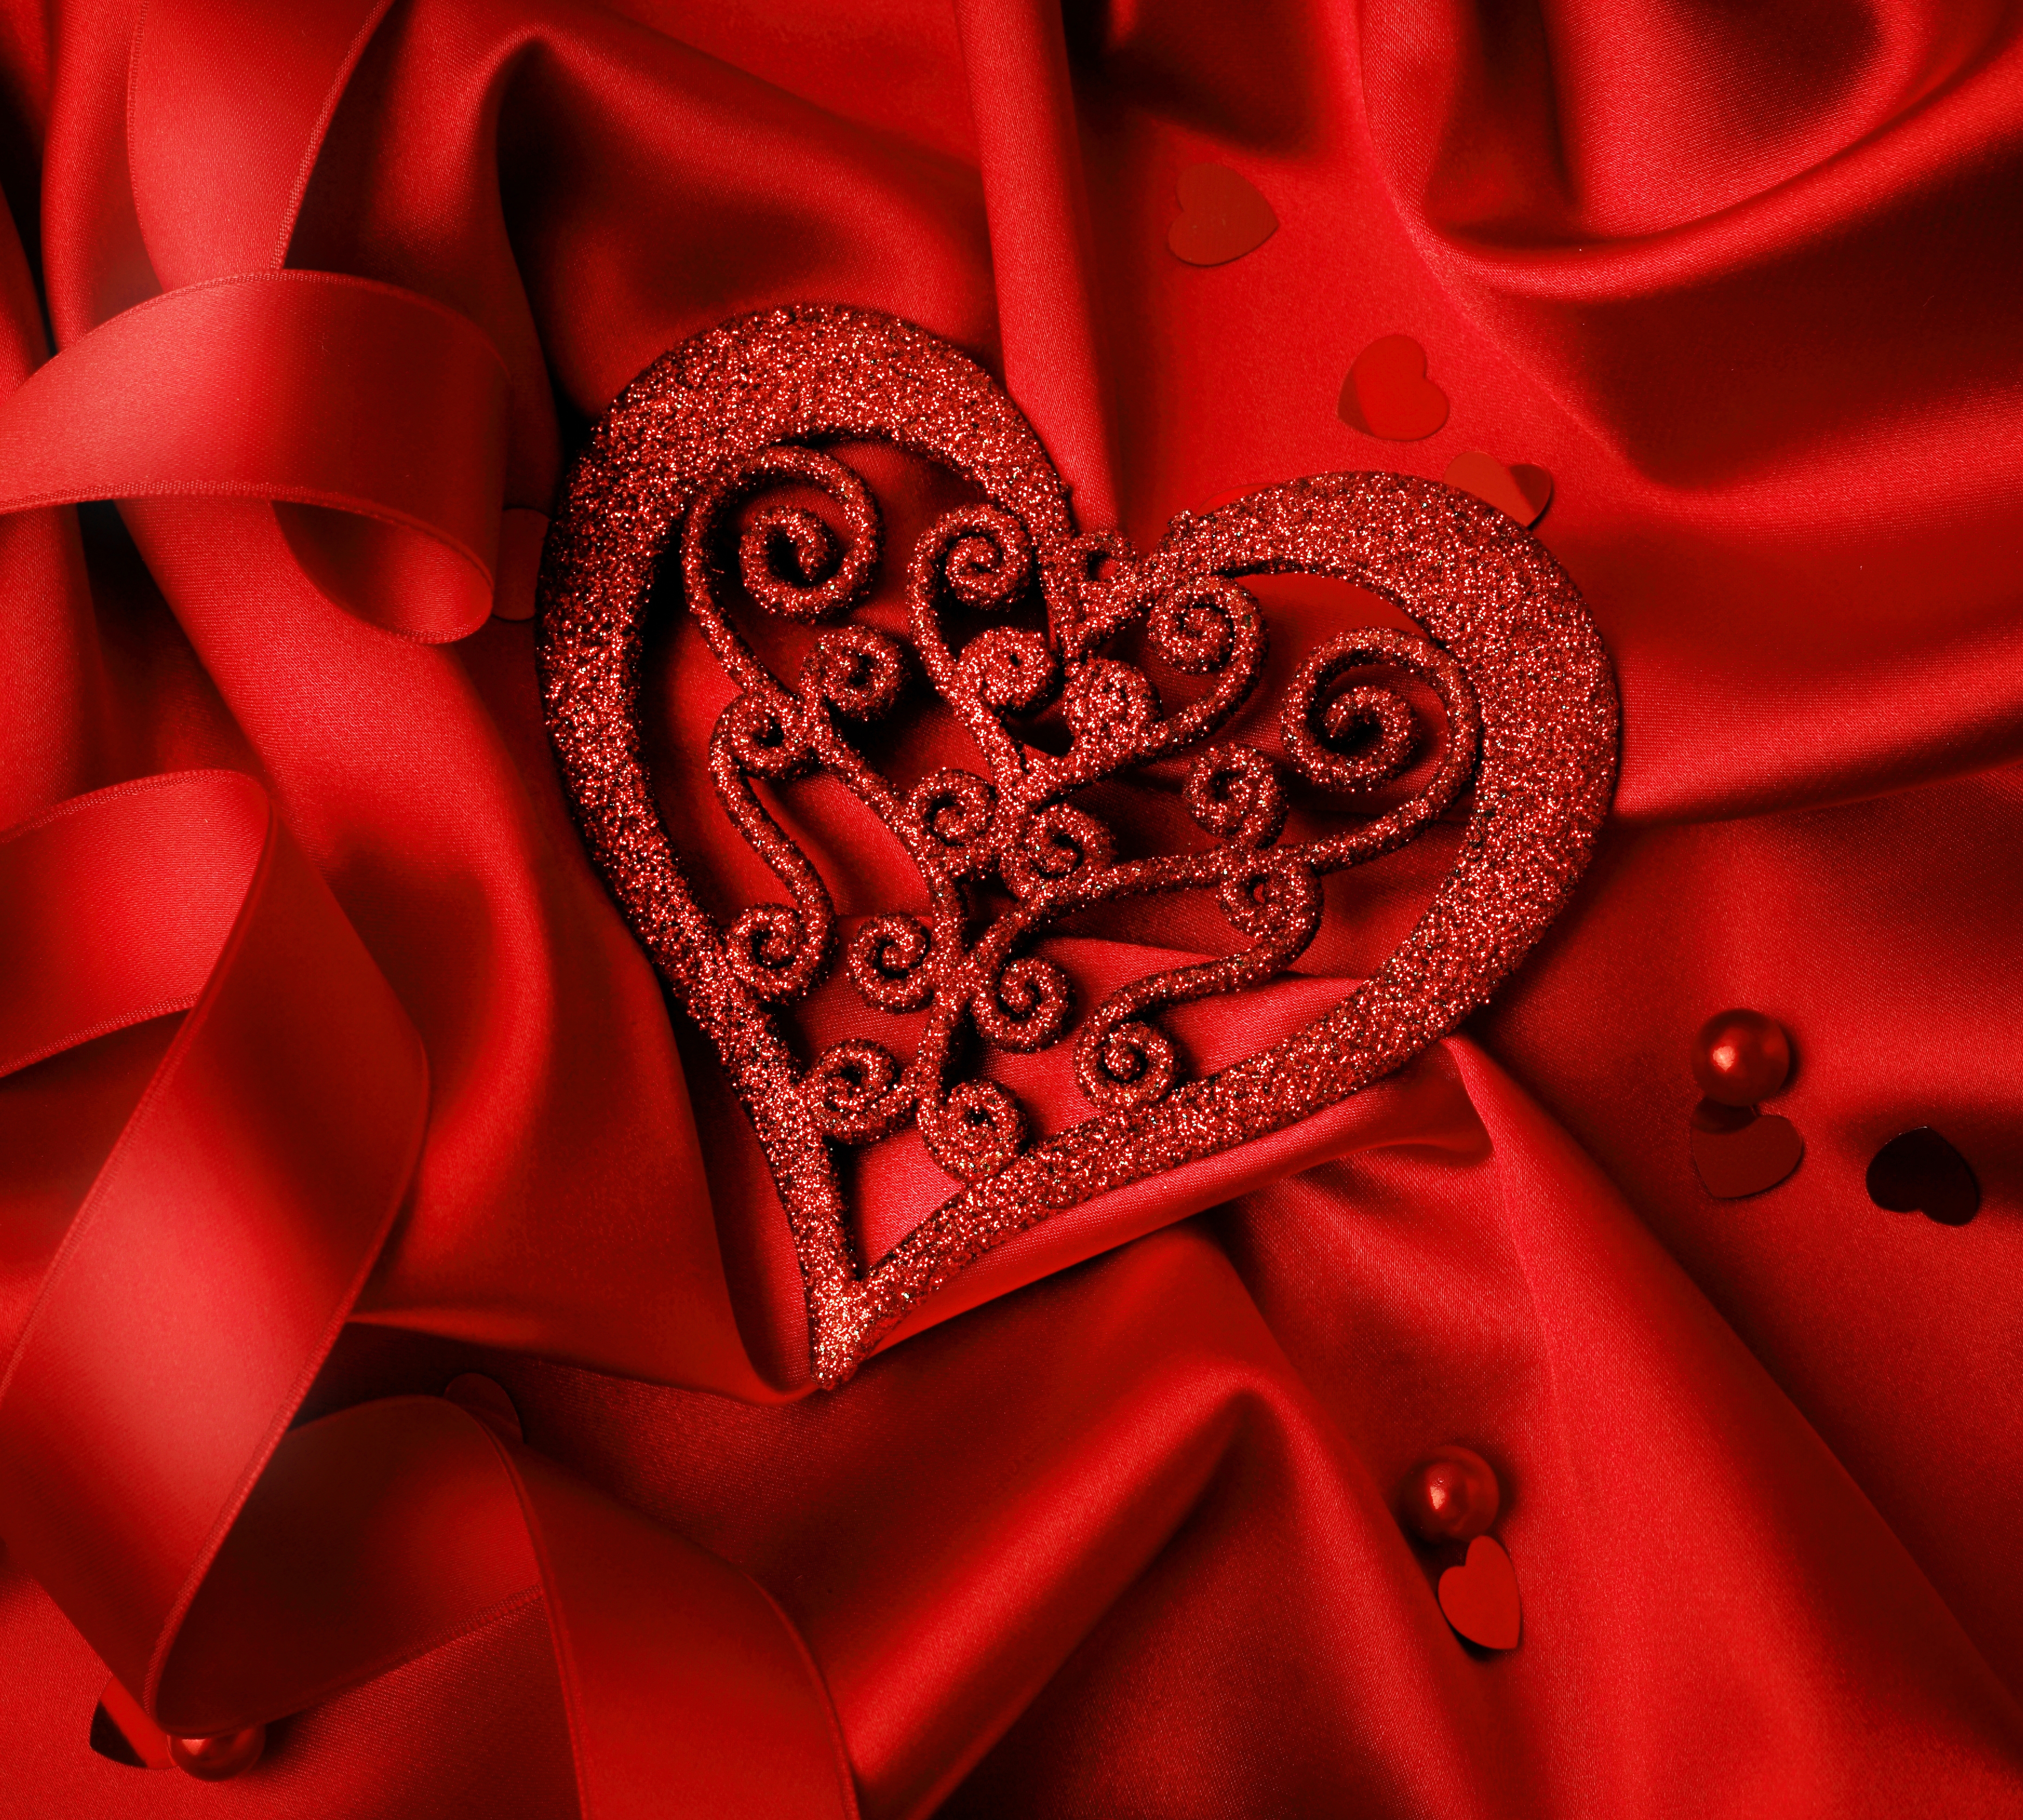 Holiday Valentine's Day HD Wallpaper Background Image. satin Phone Wal...